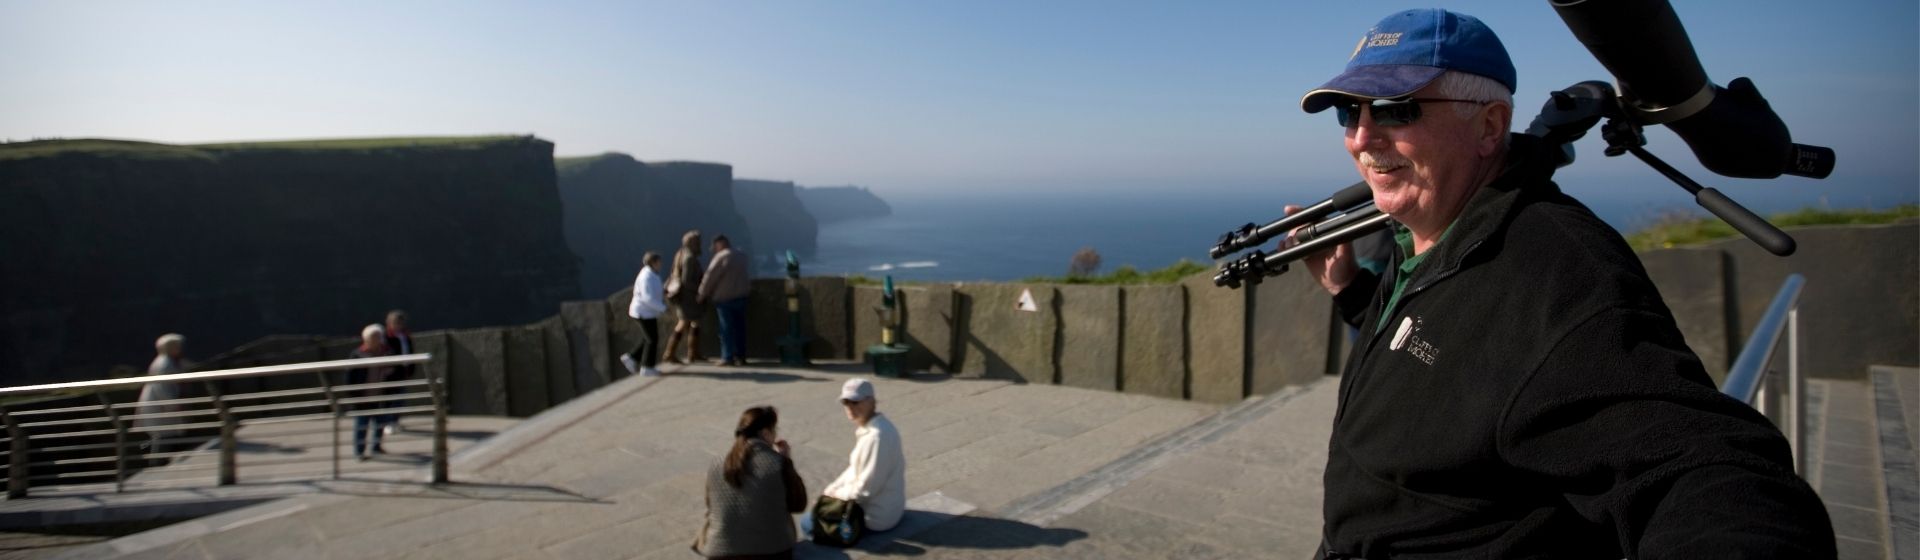 Christmas at Cliffs of Moher